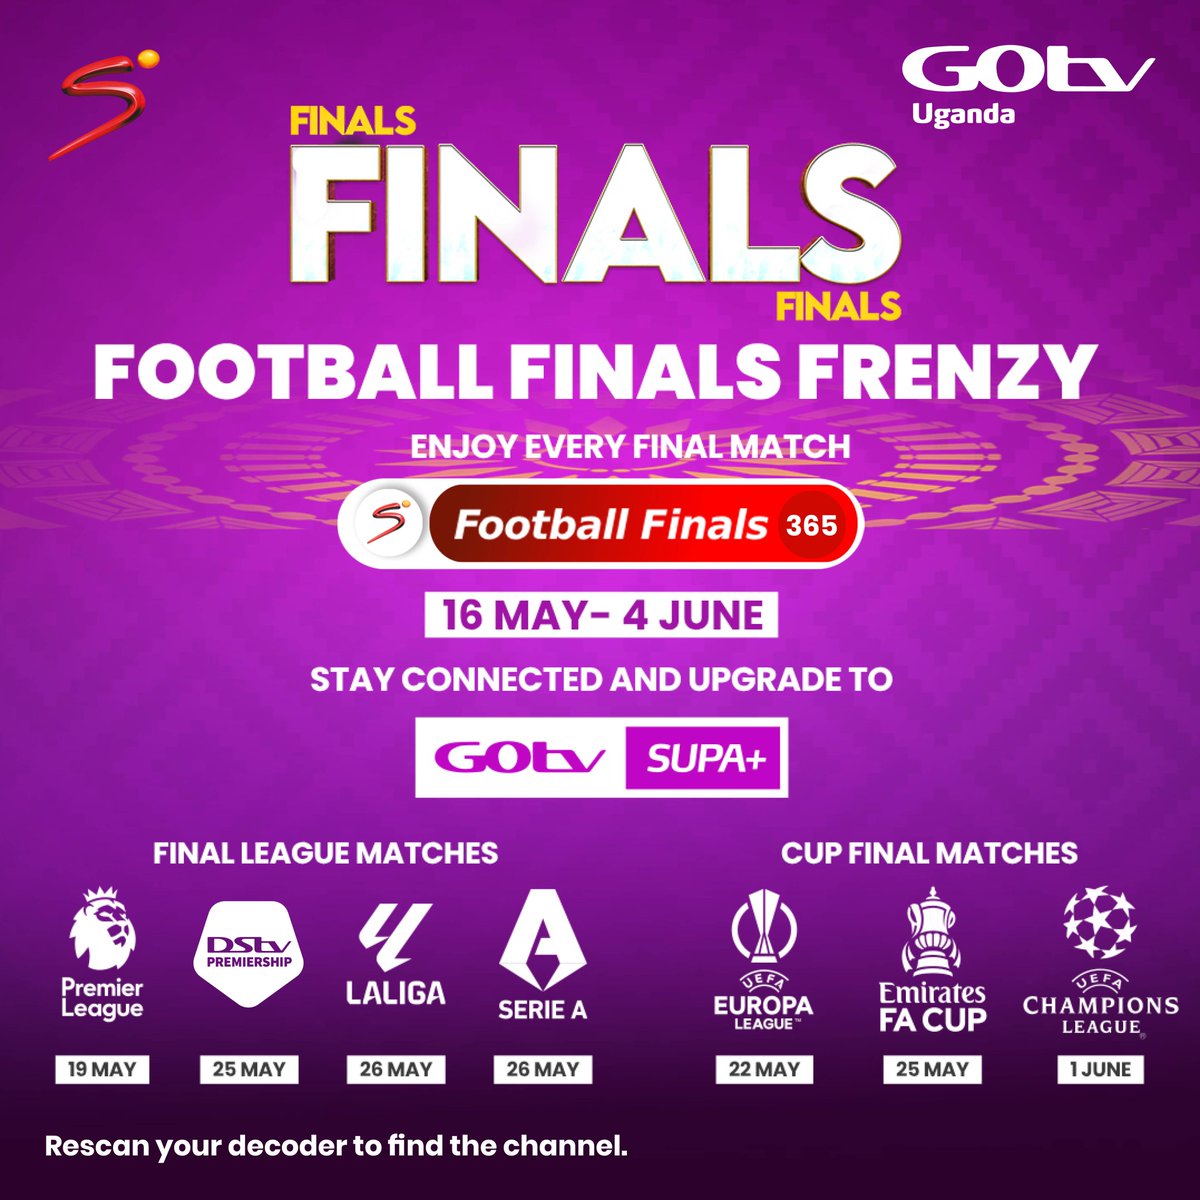 Don't miss out on the Football Finals frenzy! Enjoy all the final league matches on a dedicated 𝐅𝐨𝐨𝐭𝐛𝐚𝐥𝐥 𝐅𝐢𝐧𝐚𝐥𝐬 𝐂𝐡𝐚𝐧𝐧𝐞𝐥 𝟑𝟔𝟓 Upgrade to GOtv Supa+ at UGX 110,000 using MyGOtvApp: mygotv.onelink.me/JpWQ/gg2 or USSD: *206# #GOtvFootballMadness #GOtvStream